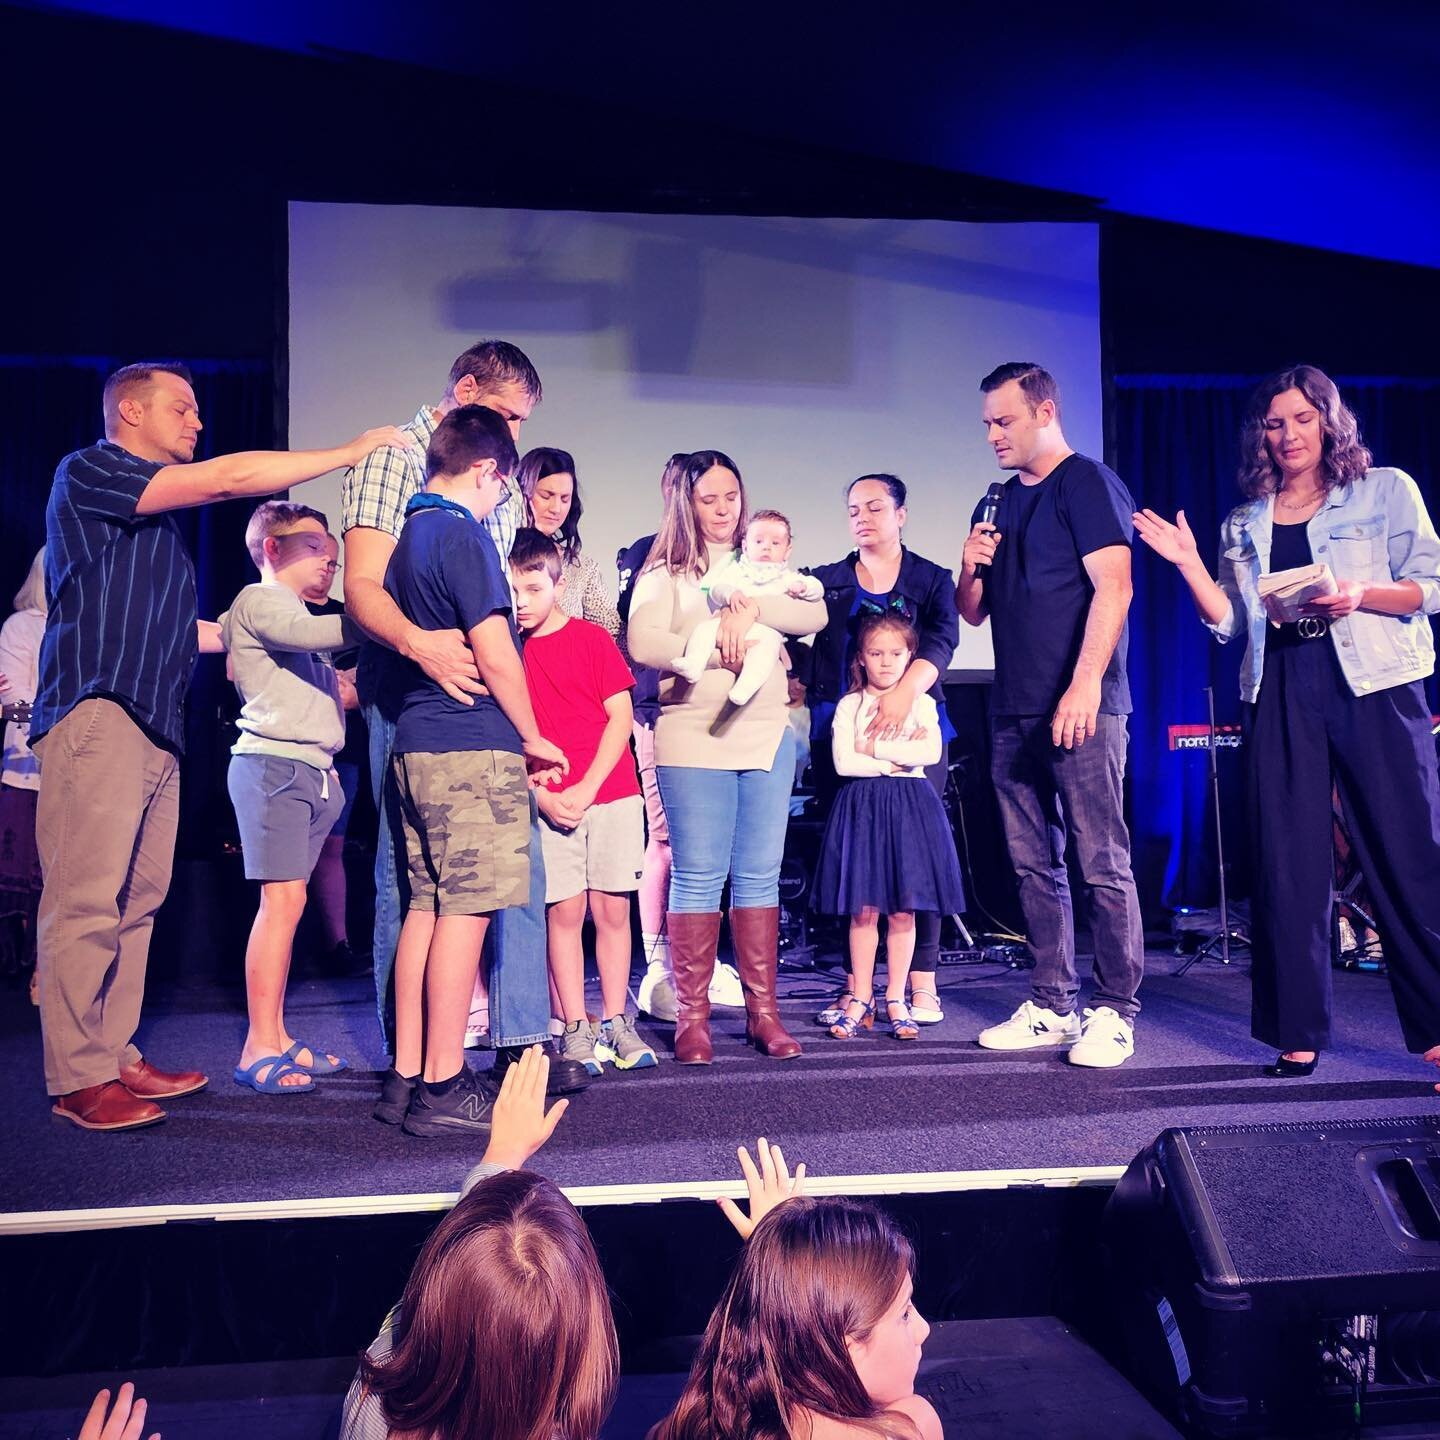 Last week, we celebrated a special moment at Engage Church - a baby dedication for baby Reuben! It was a beautiful ceremony where we dedicated Reuben to God and committed to raising him in a way that honours and glorifies Him. We believe that childre